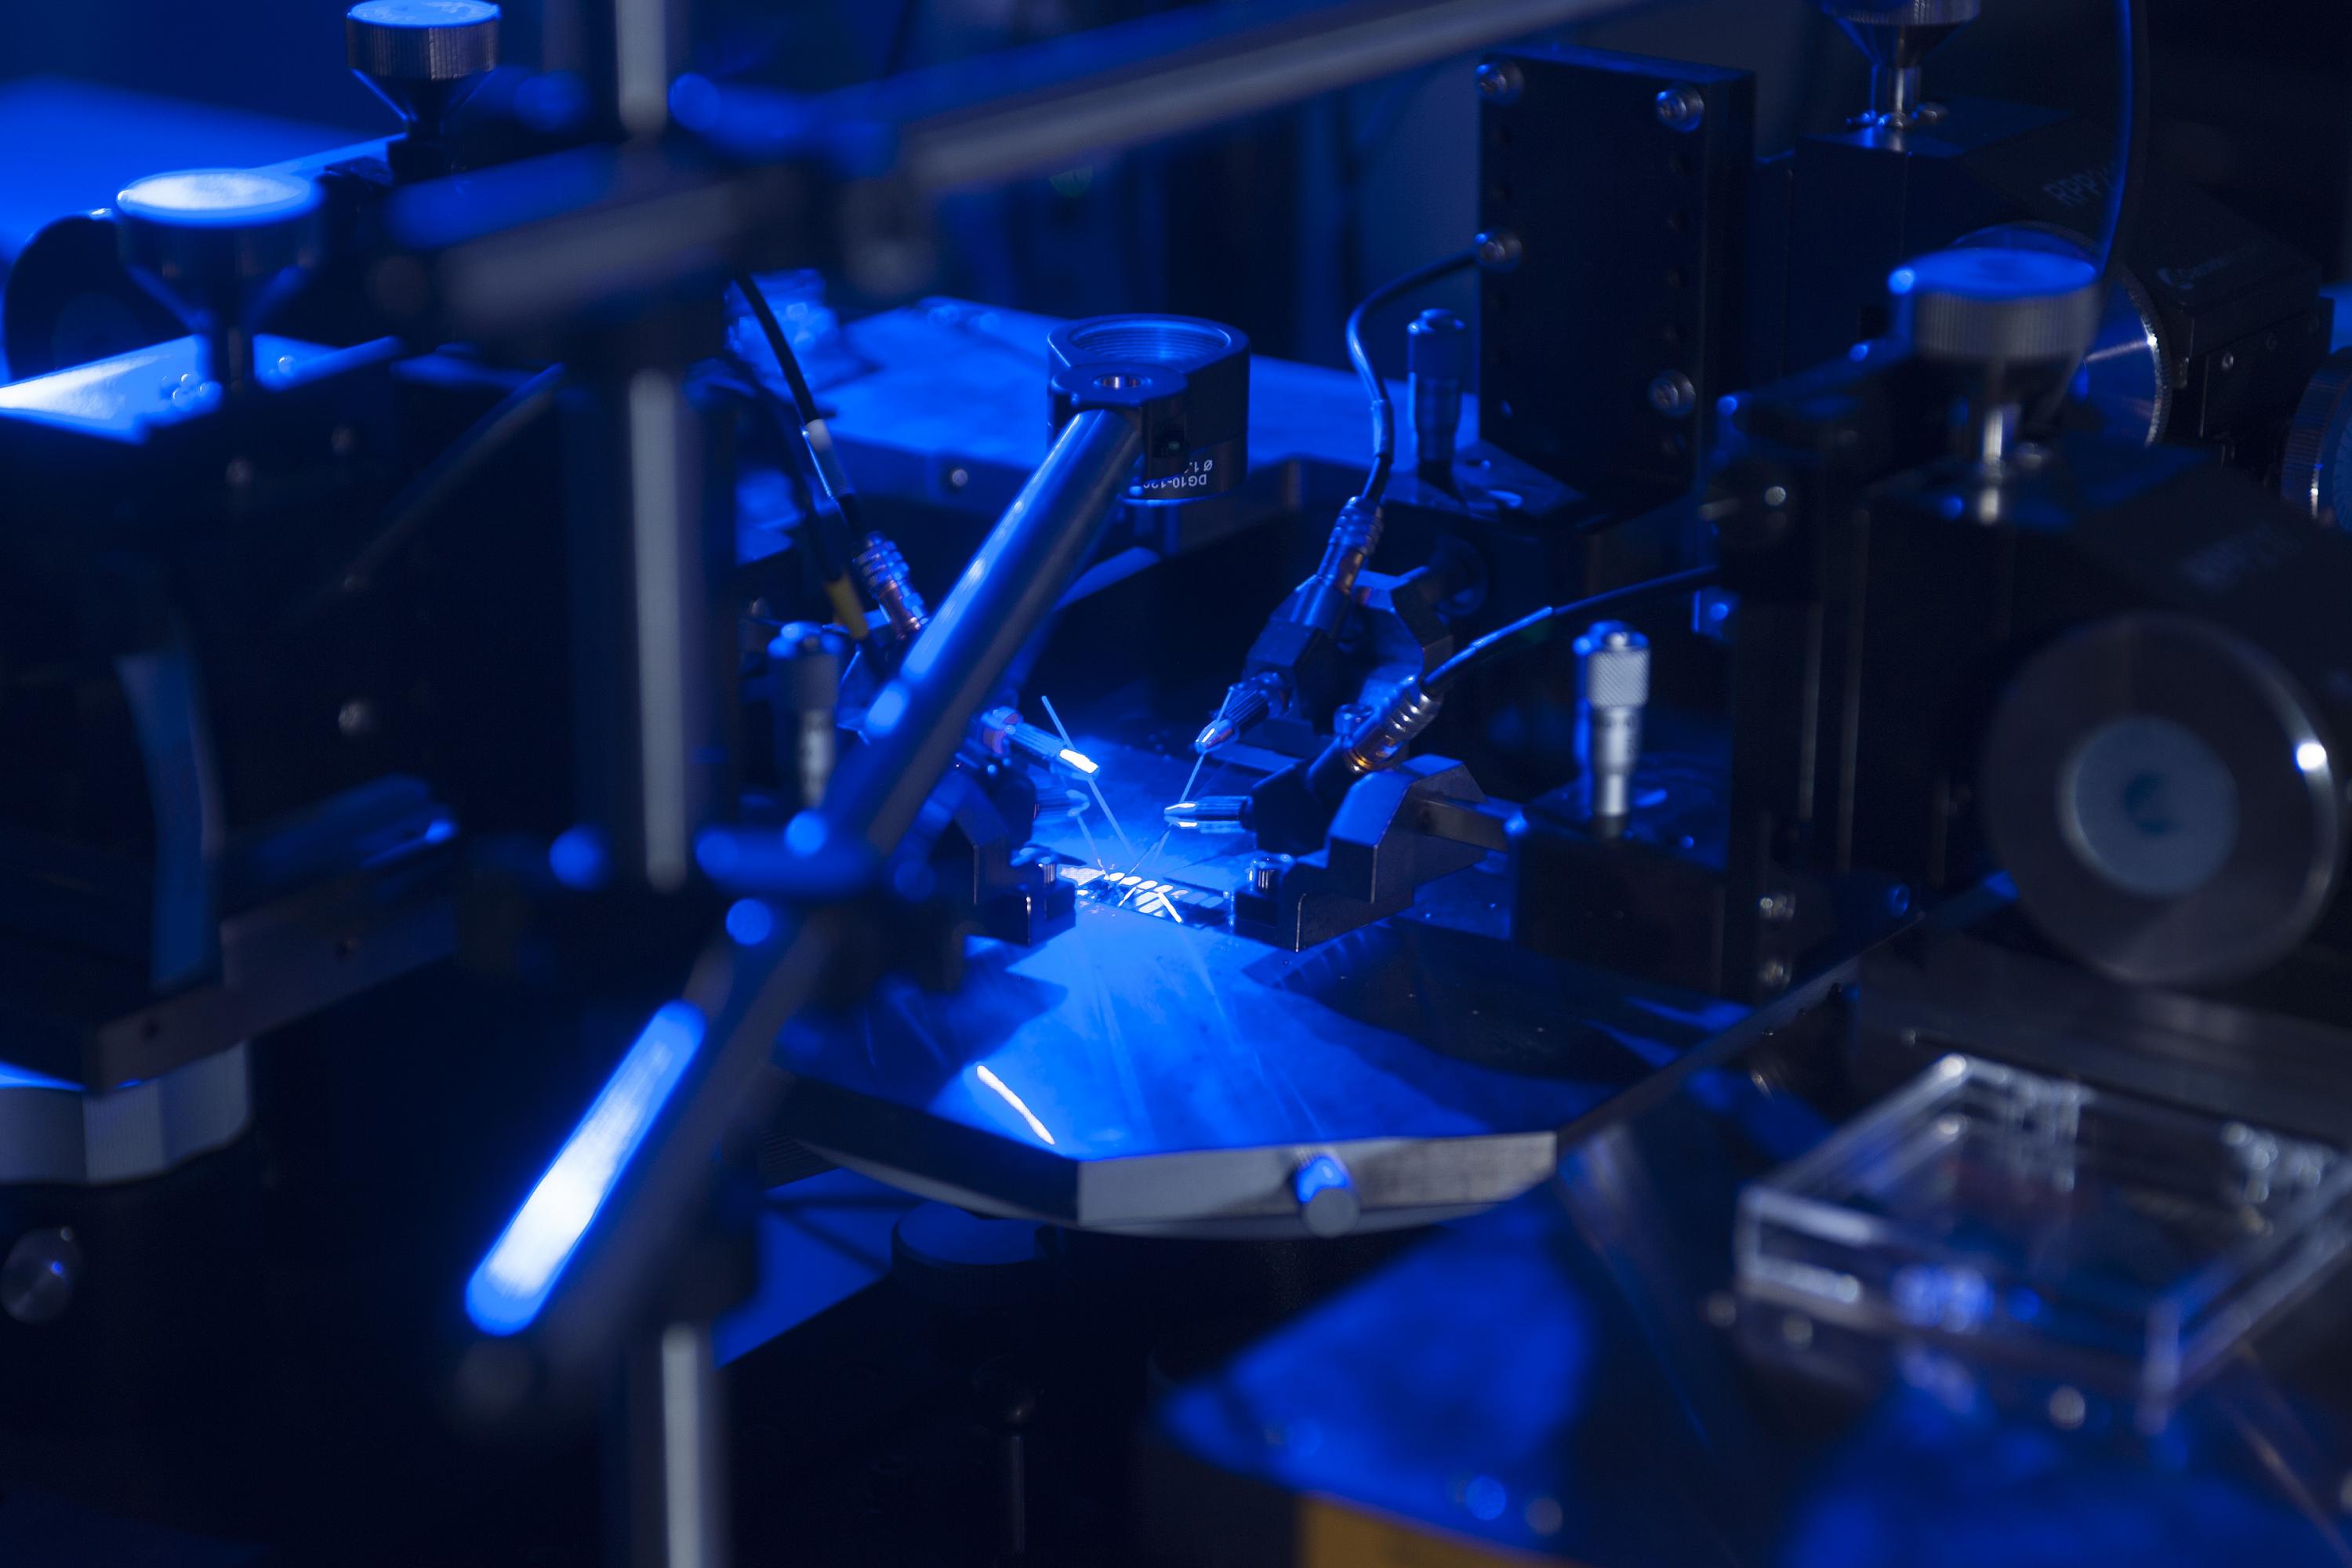 Georgia Tech researchers have developed a new higher efficiency rectenna design. Here, the device’s ability to convert blue light to electricity is tested. (Credit: Christopher Moore, Georgia Tech)